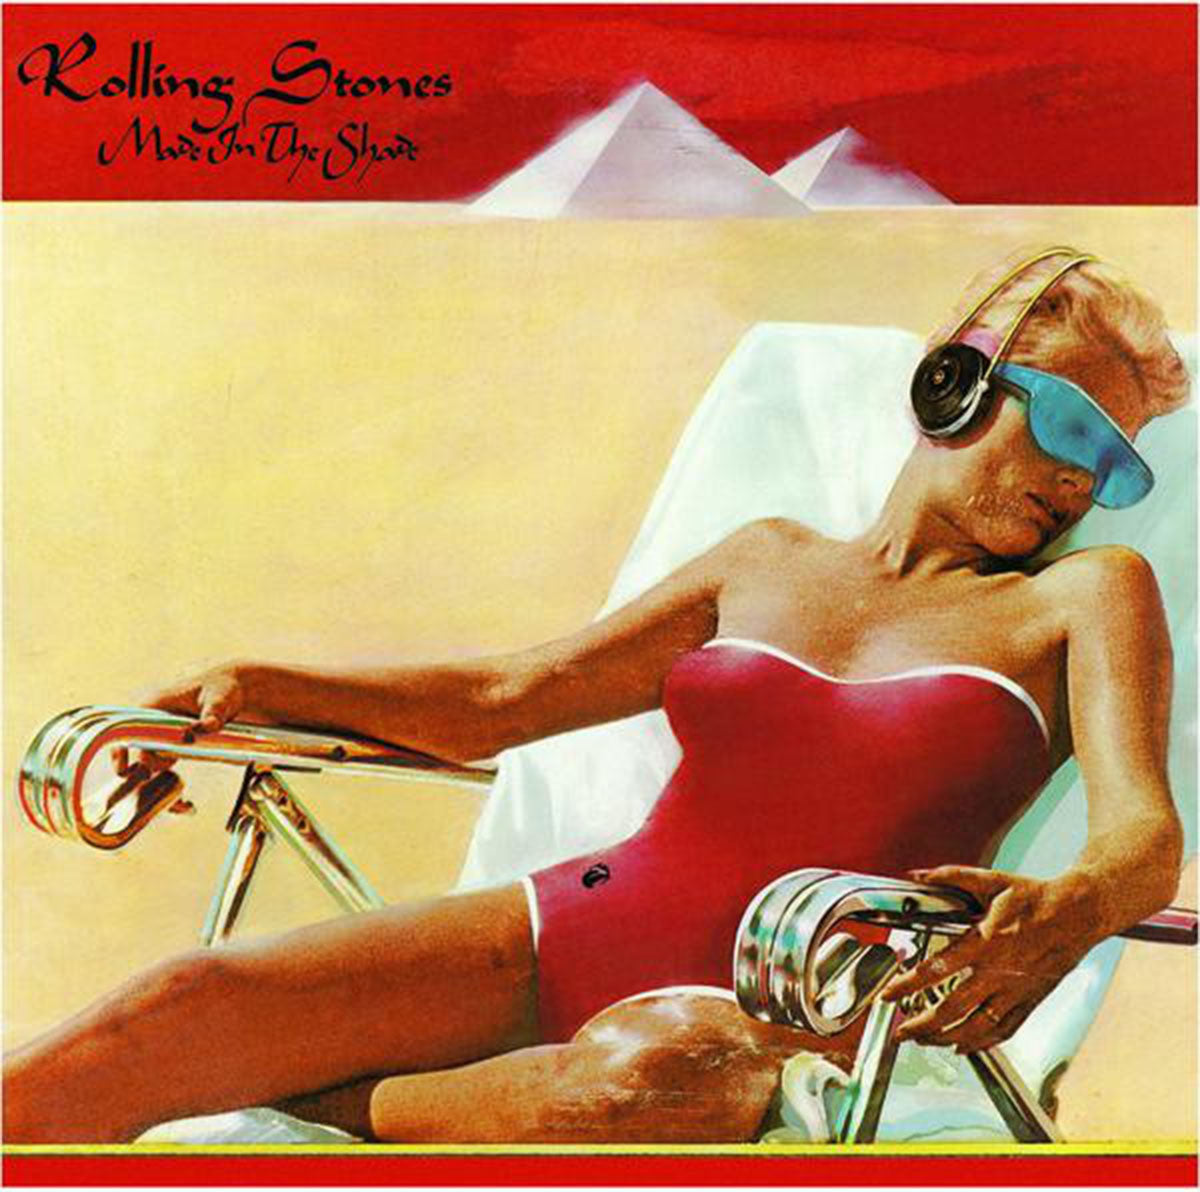 Rolling Stones – Made In The Shade - 1975